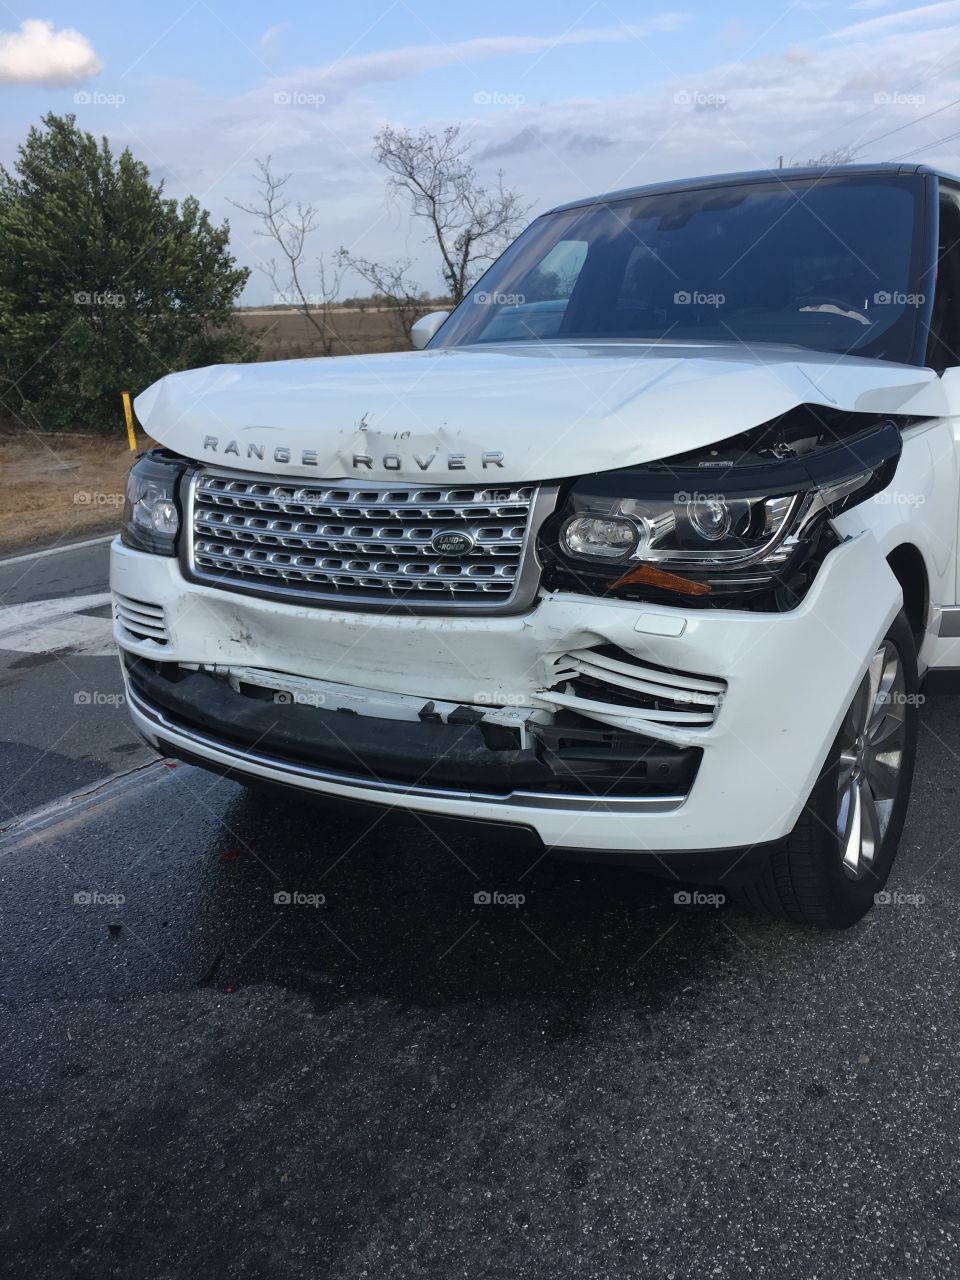 Car crash on the road Land Rover 